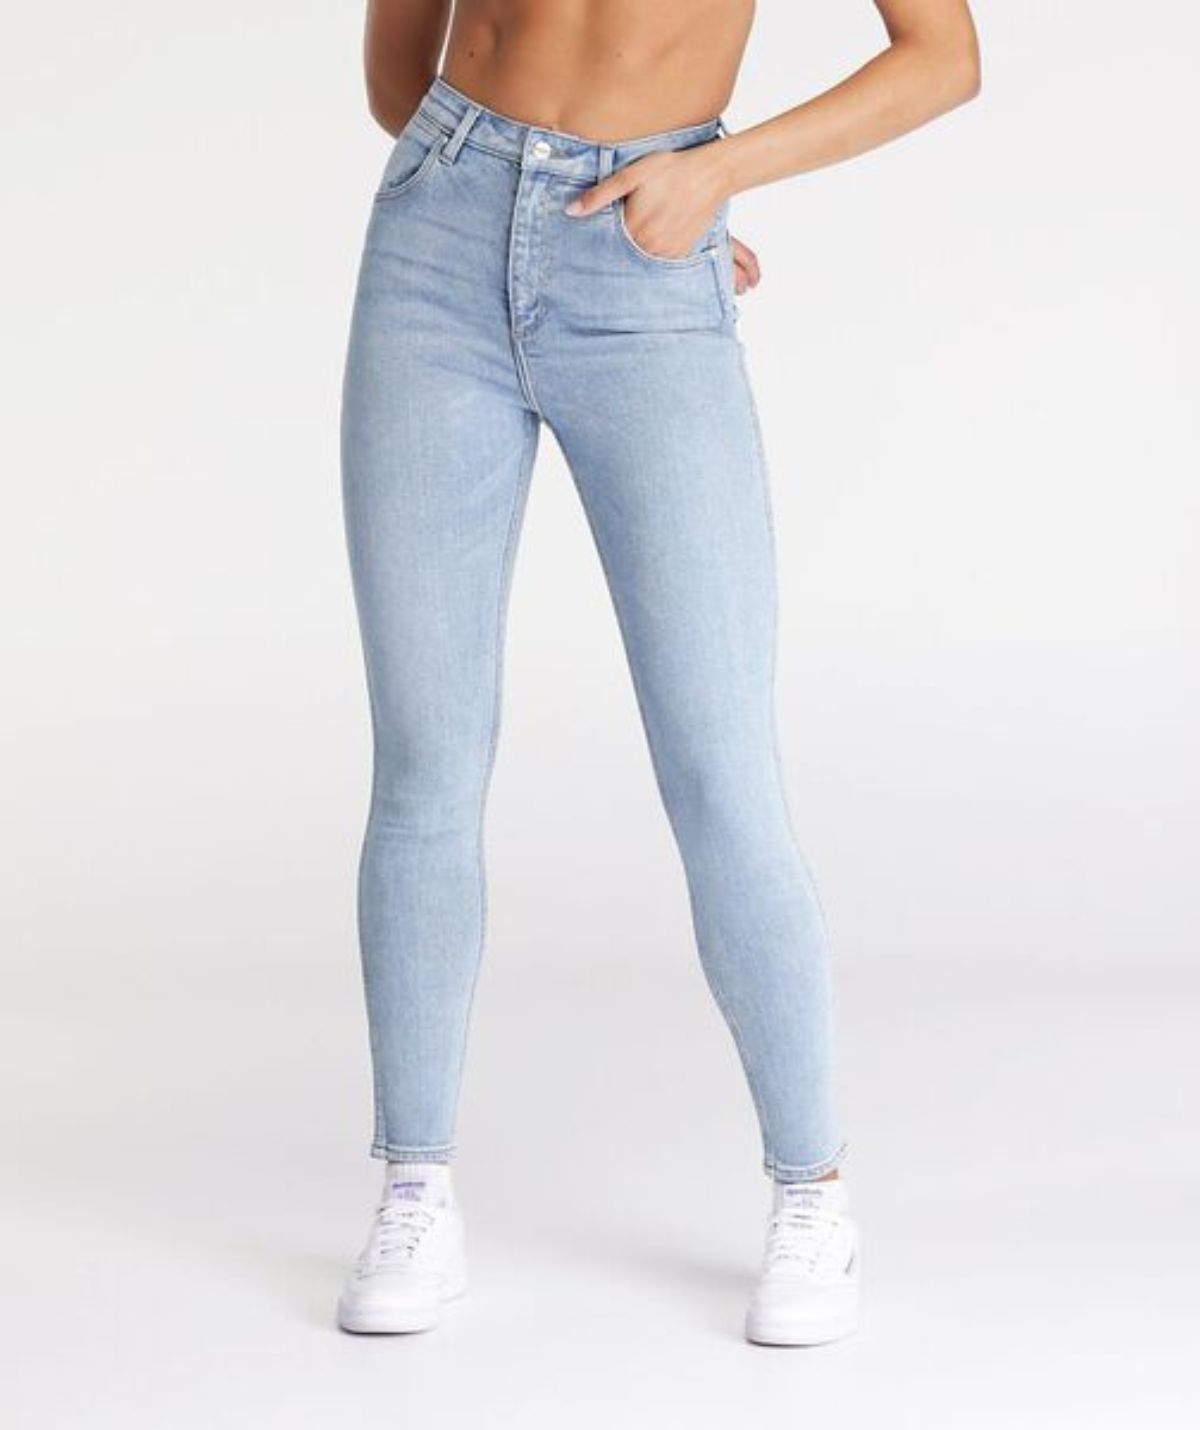 Which Jean Style Will Suit My Body Shape?